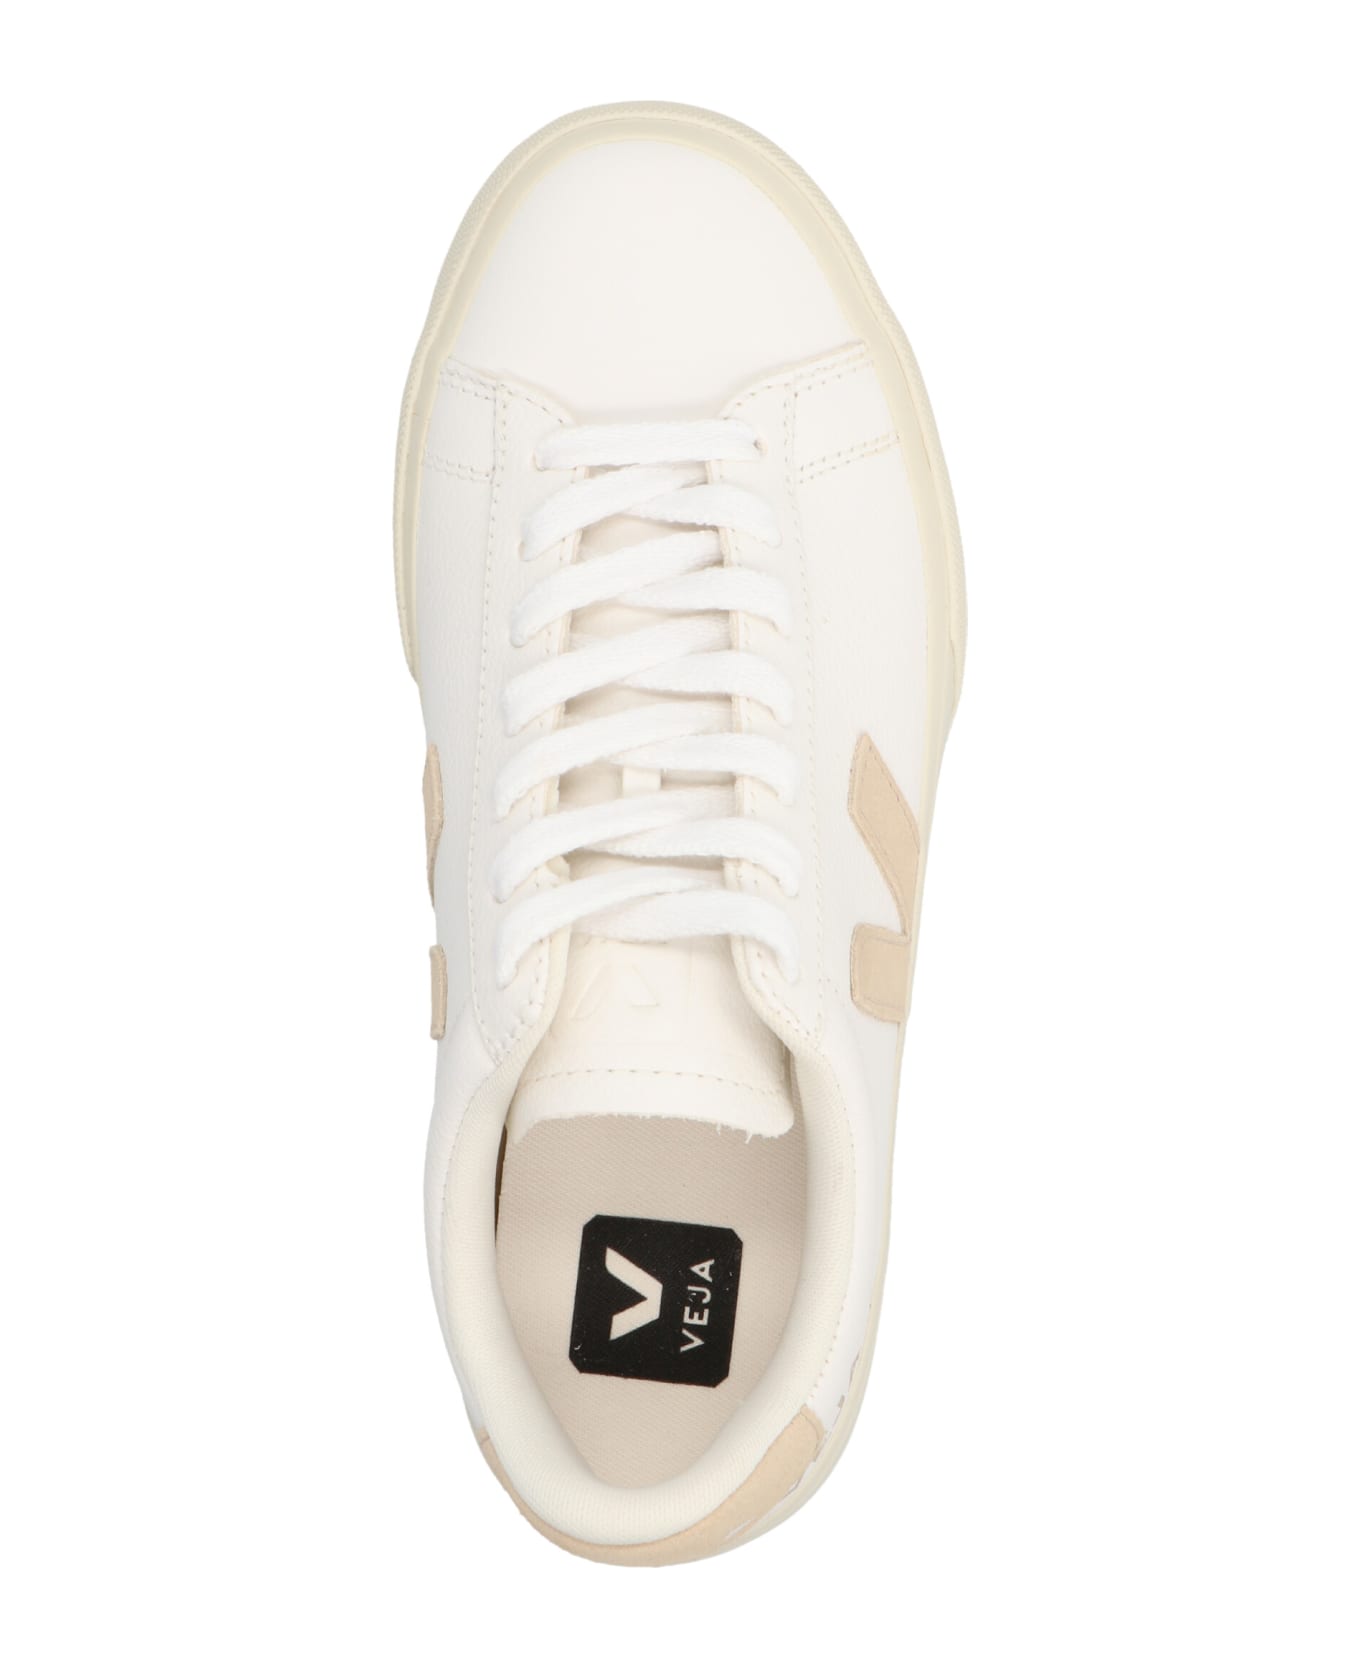 Veja 'campo Sneakers - Extra White/ Almond スニーカー